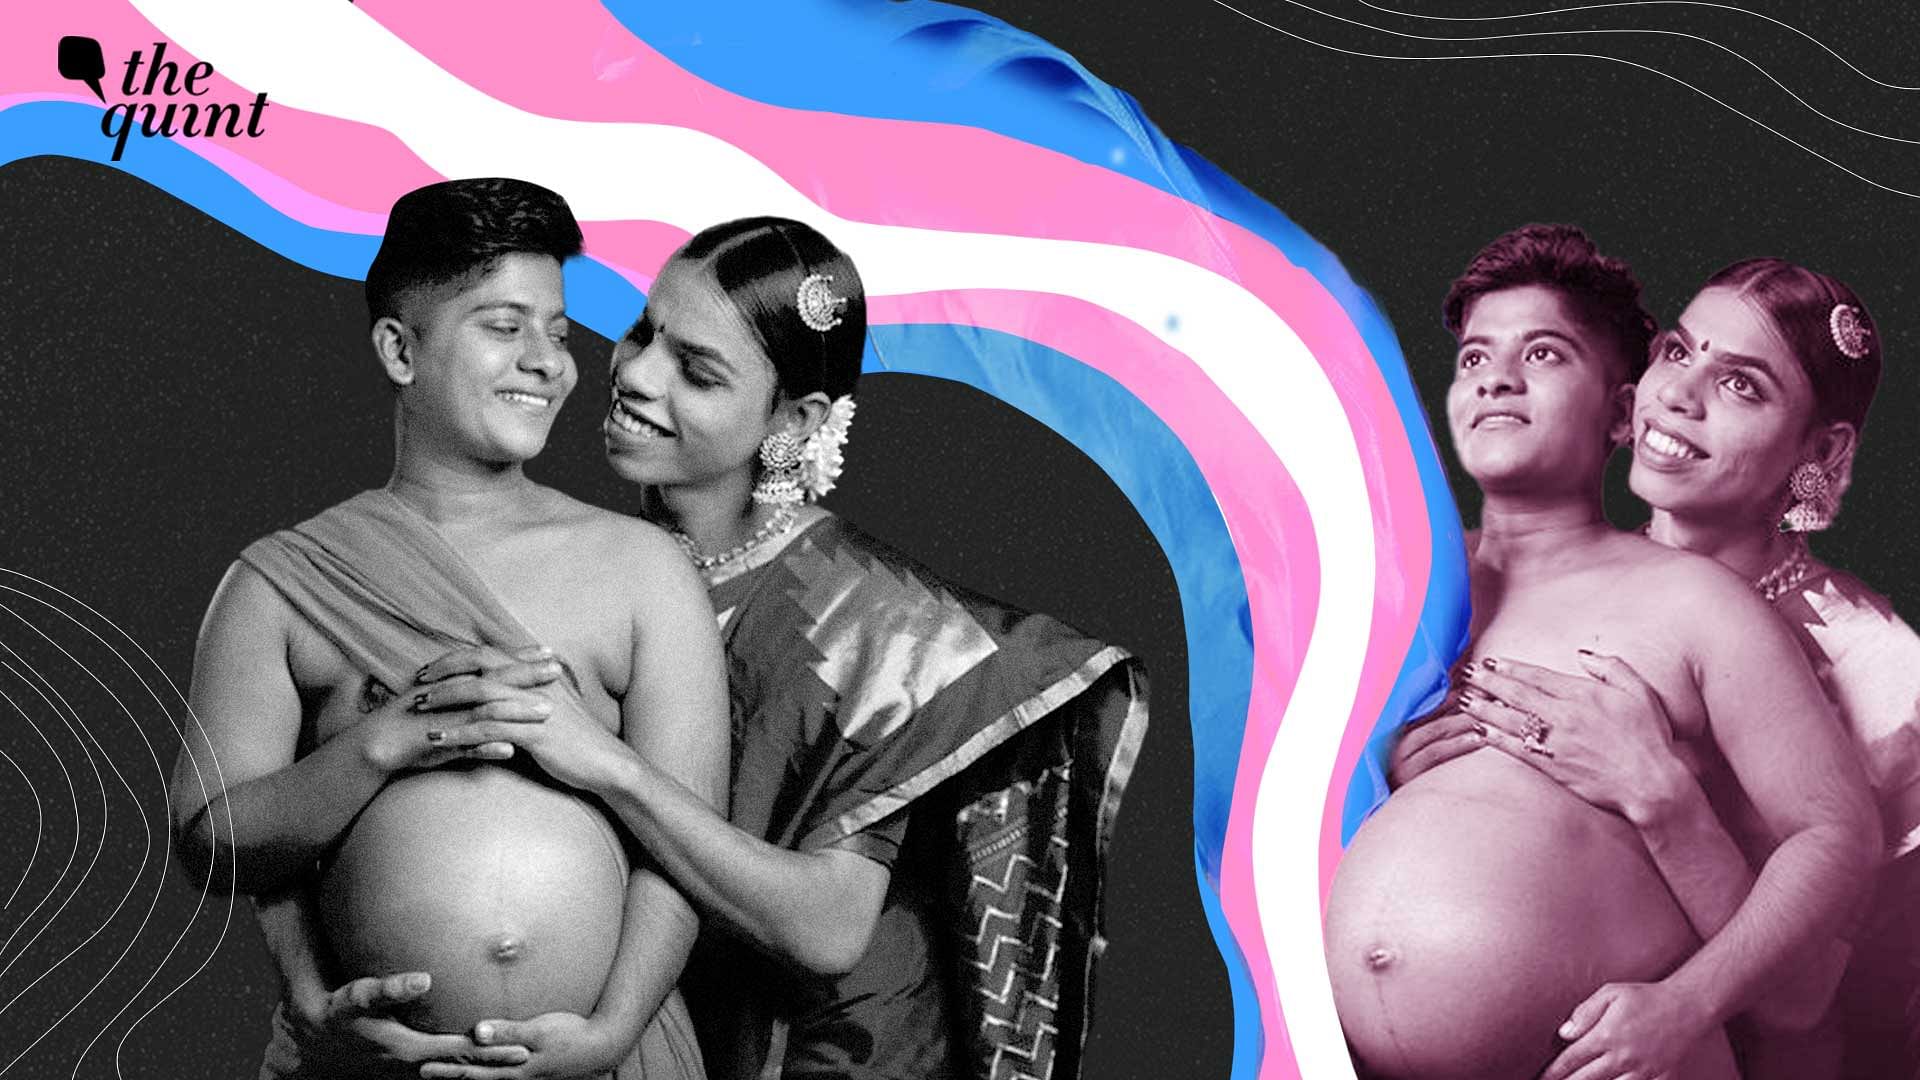 Kerala Transman Announces Pregnancy Transgender Couple Say They Feel Adipoli Kerala as They Expect Their Baby